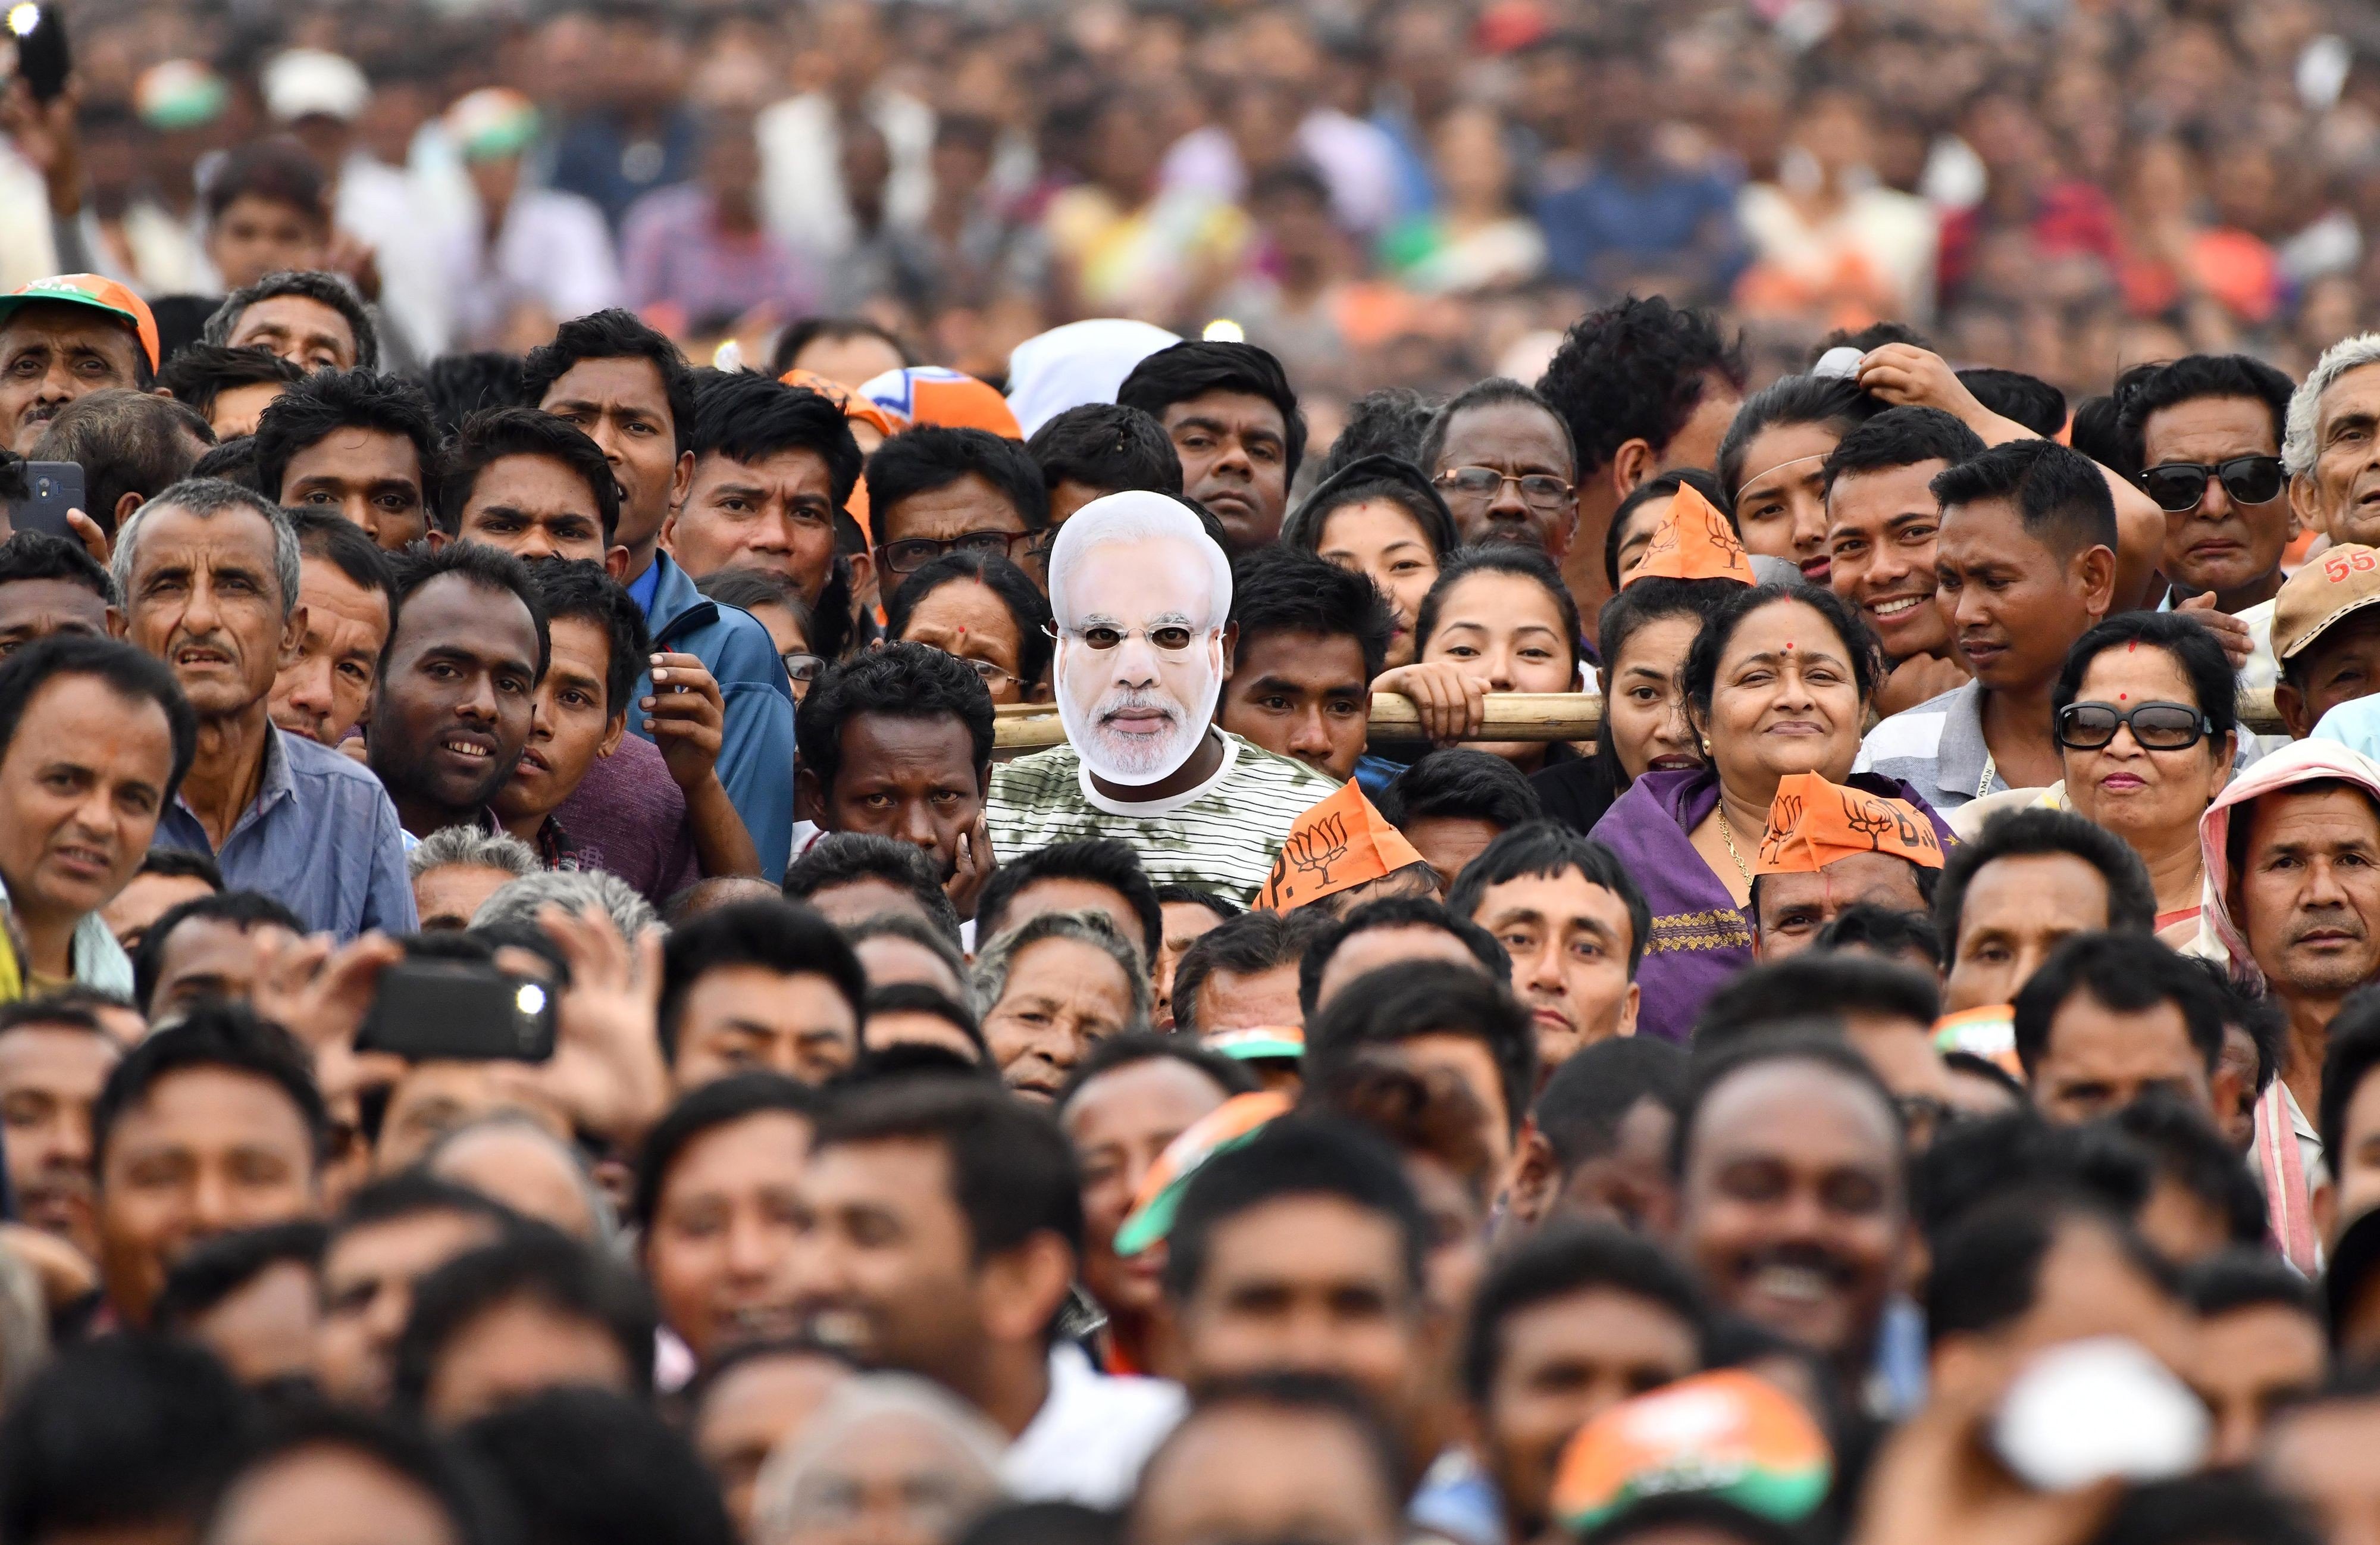 An Indian supporter of the Bharatiya Janata Party (BJP) wearing a mask of Prime Minister Narendra Modi and other supporters attend one of Modi's political campaigns ahead of India's general election in Gohpur, the capital city of the northeastern state of Assam, on March 30. Photo: AFP